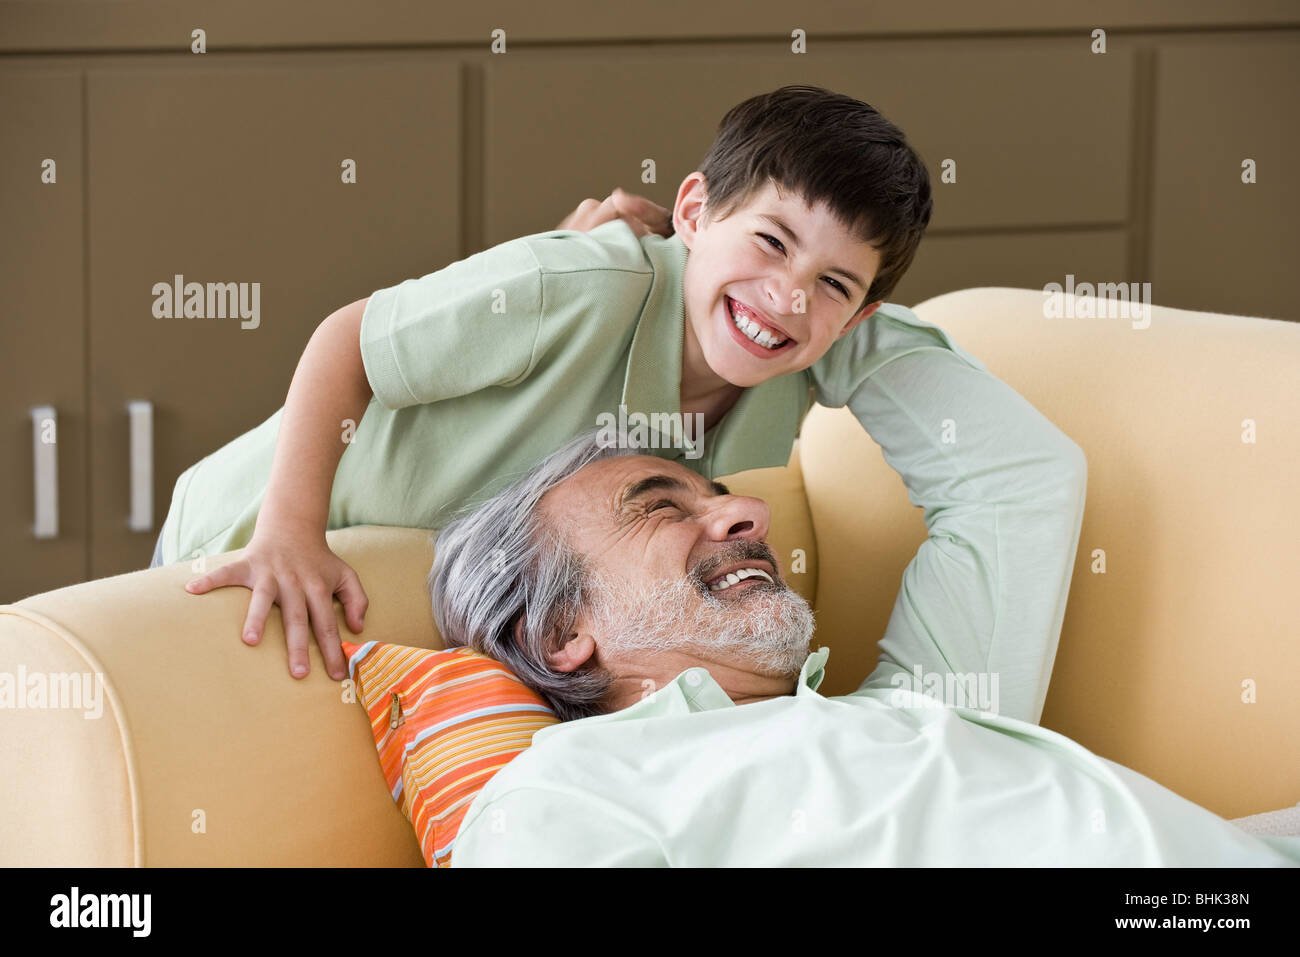 Senior man relaxing, enjoying time with young grandson Stock Photo